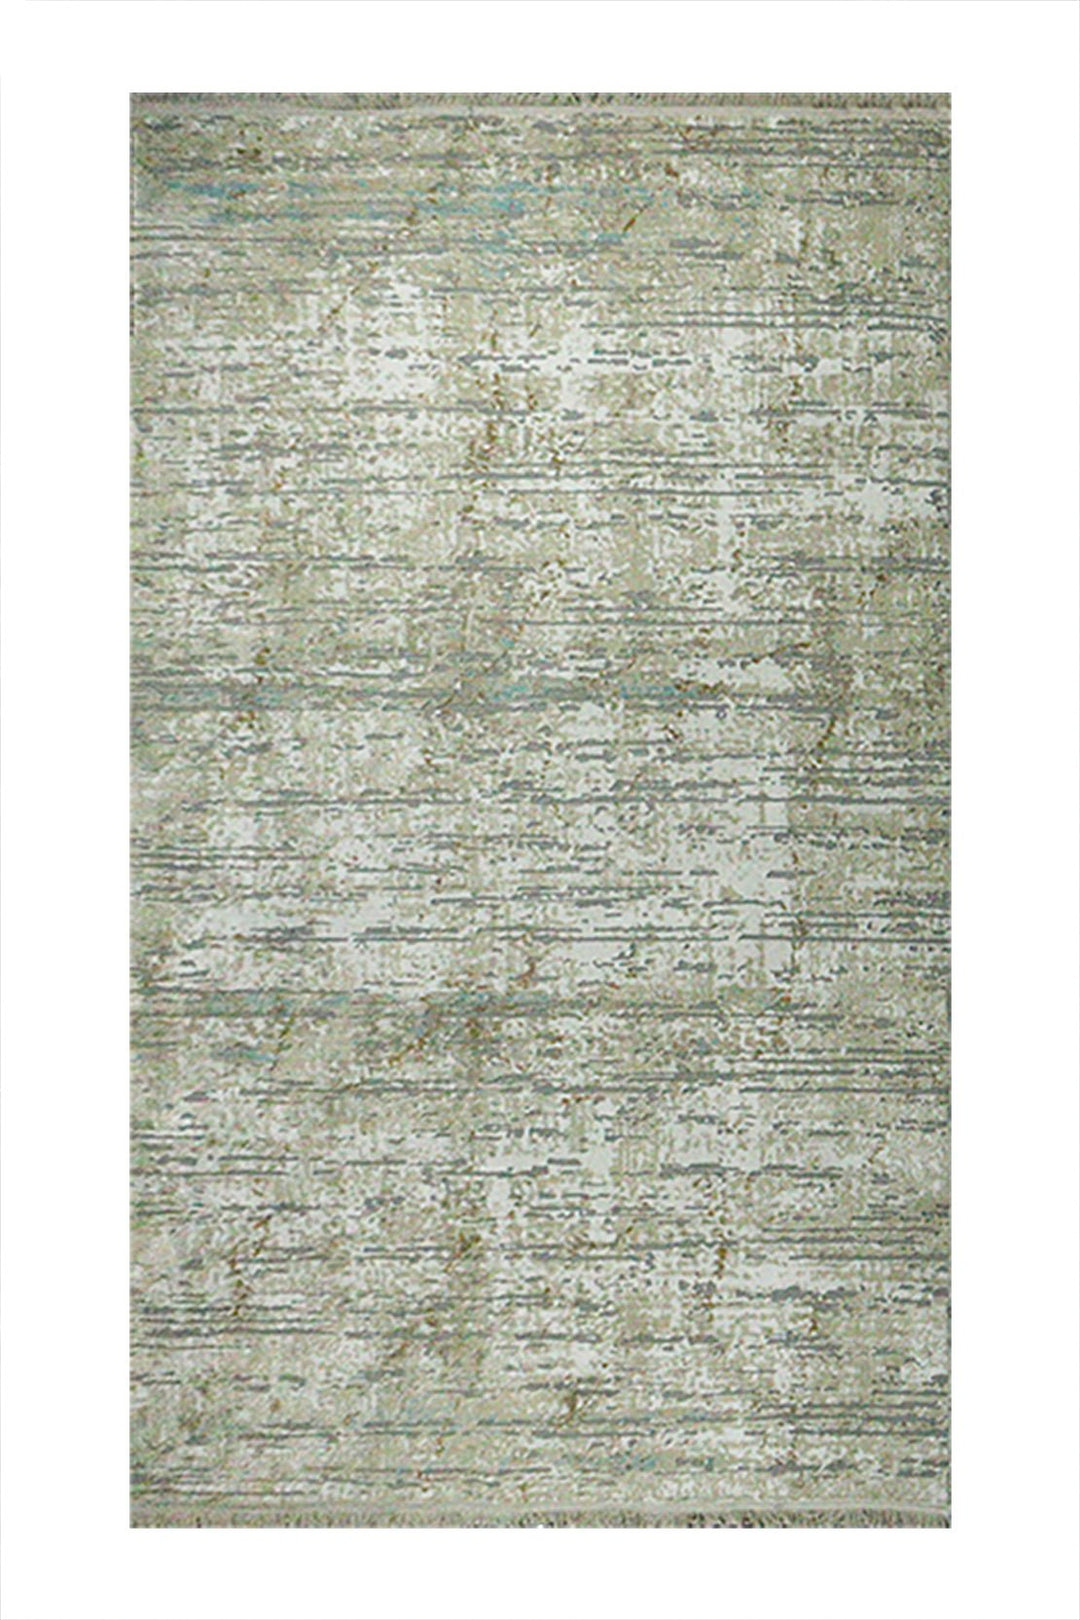 Turkish Modern Festival WD Rug - 5.6 x 8.2 FT - Gray - Sleek and Minimalist for Chic Interiors - V Surfaces